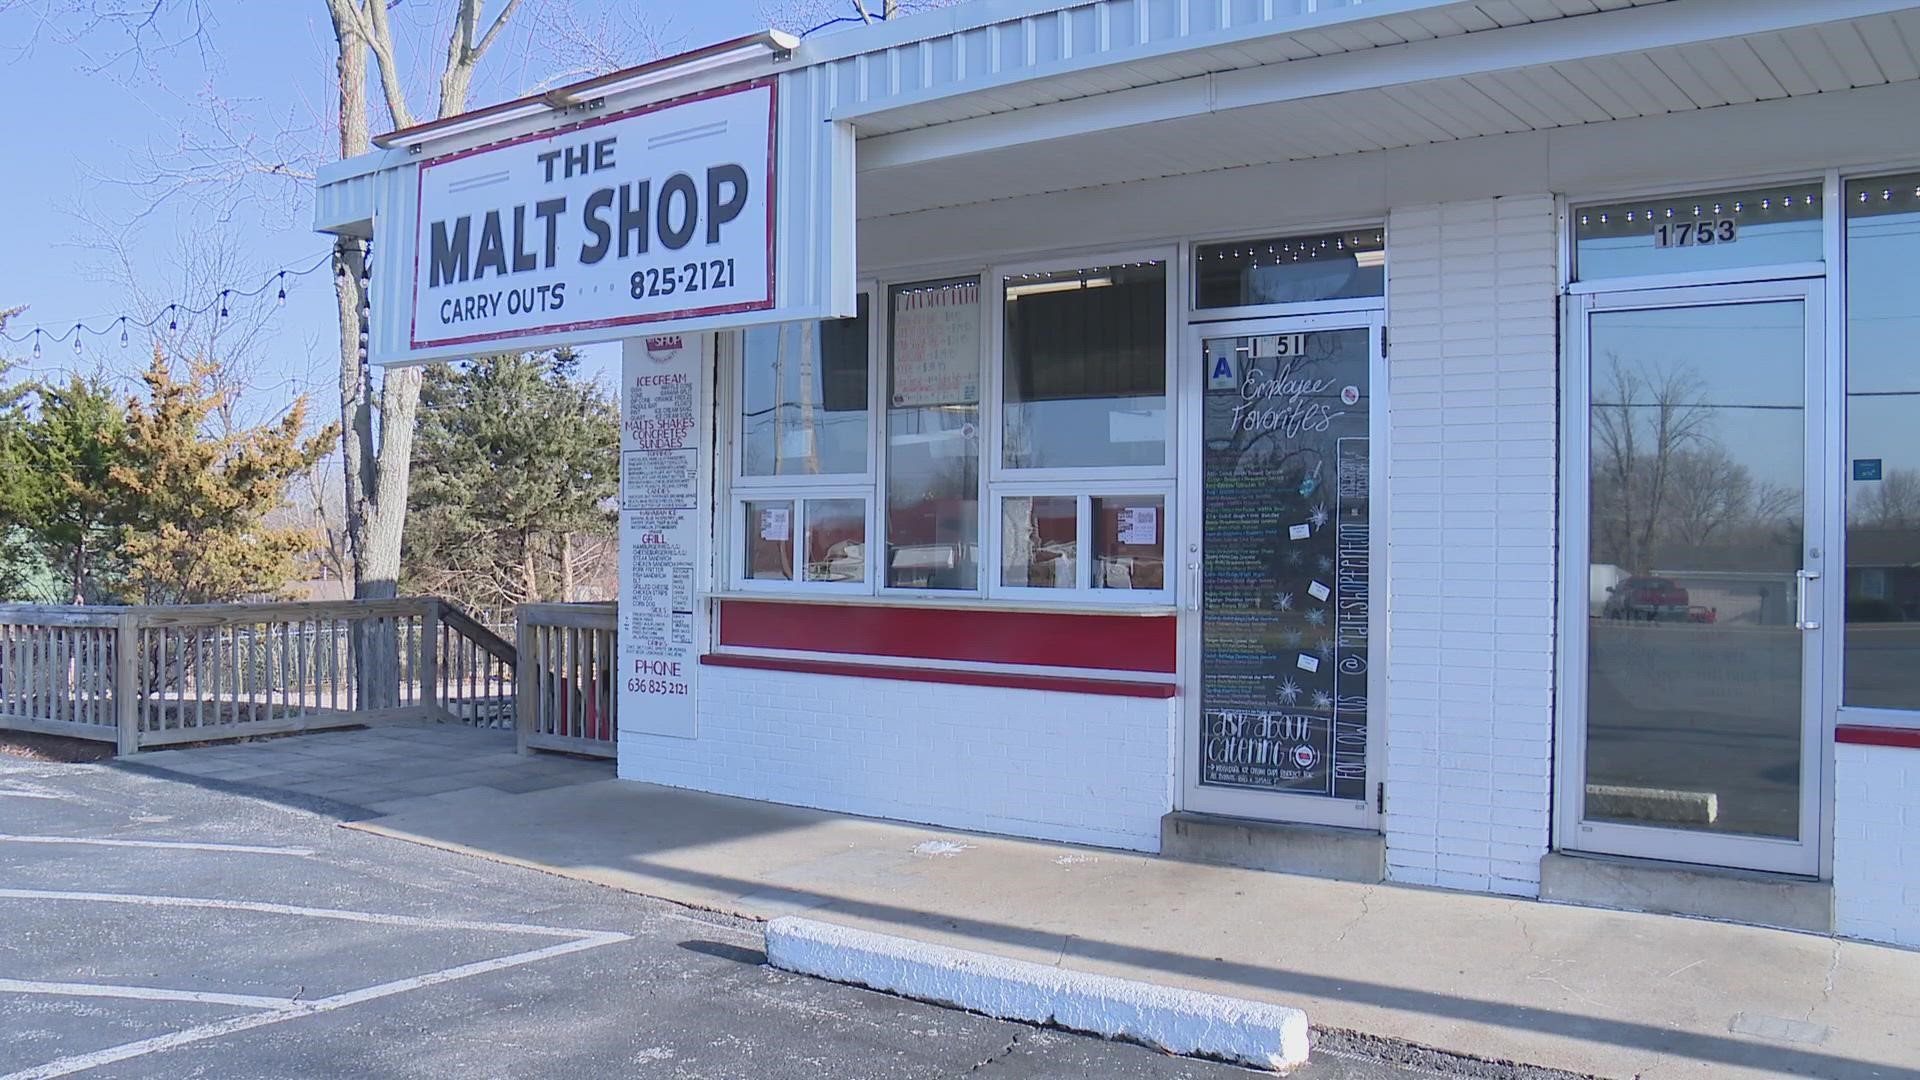 The Malt Shop in Fenton is celebrating 50 years of serving real soft serve. Regulars say the shop also serves up the best burgers in town.